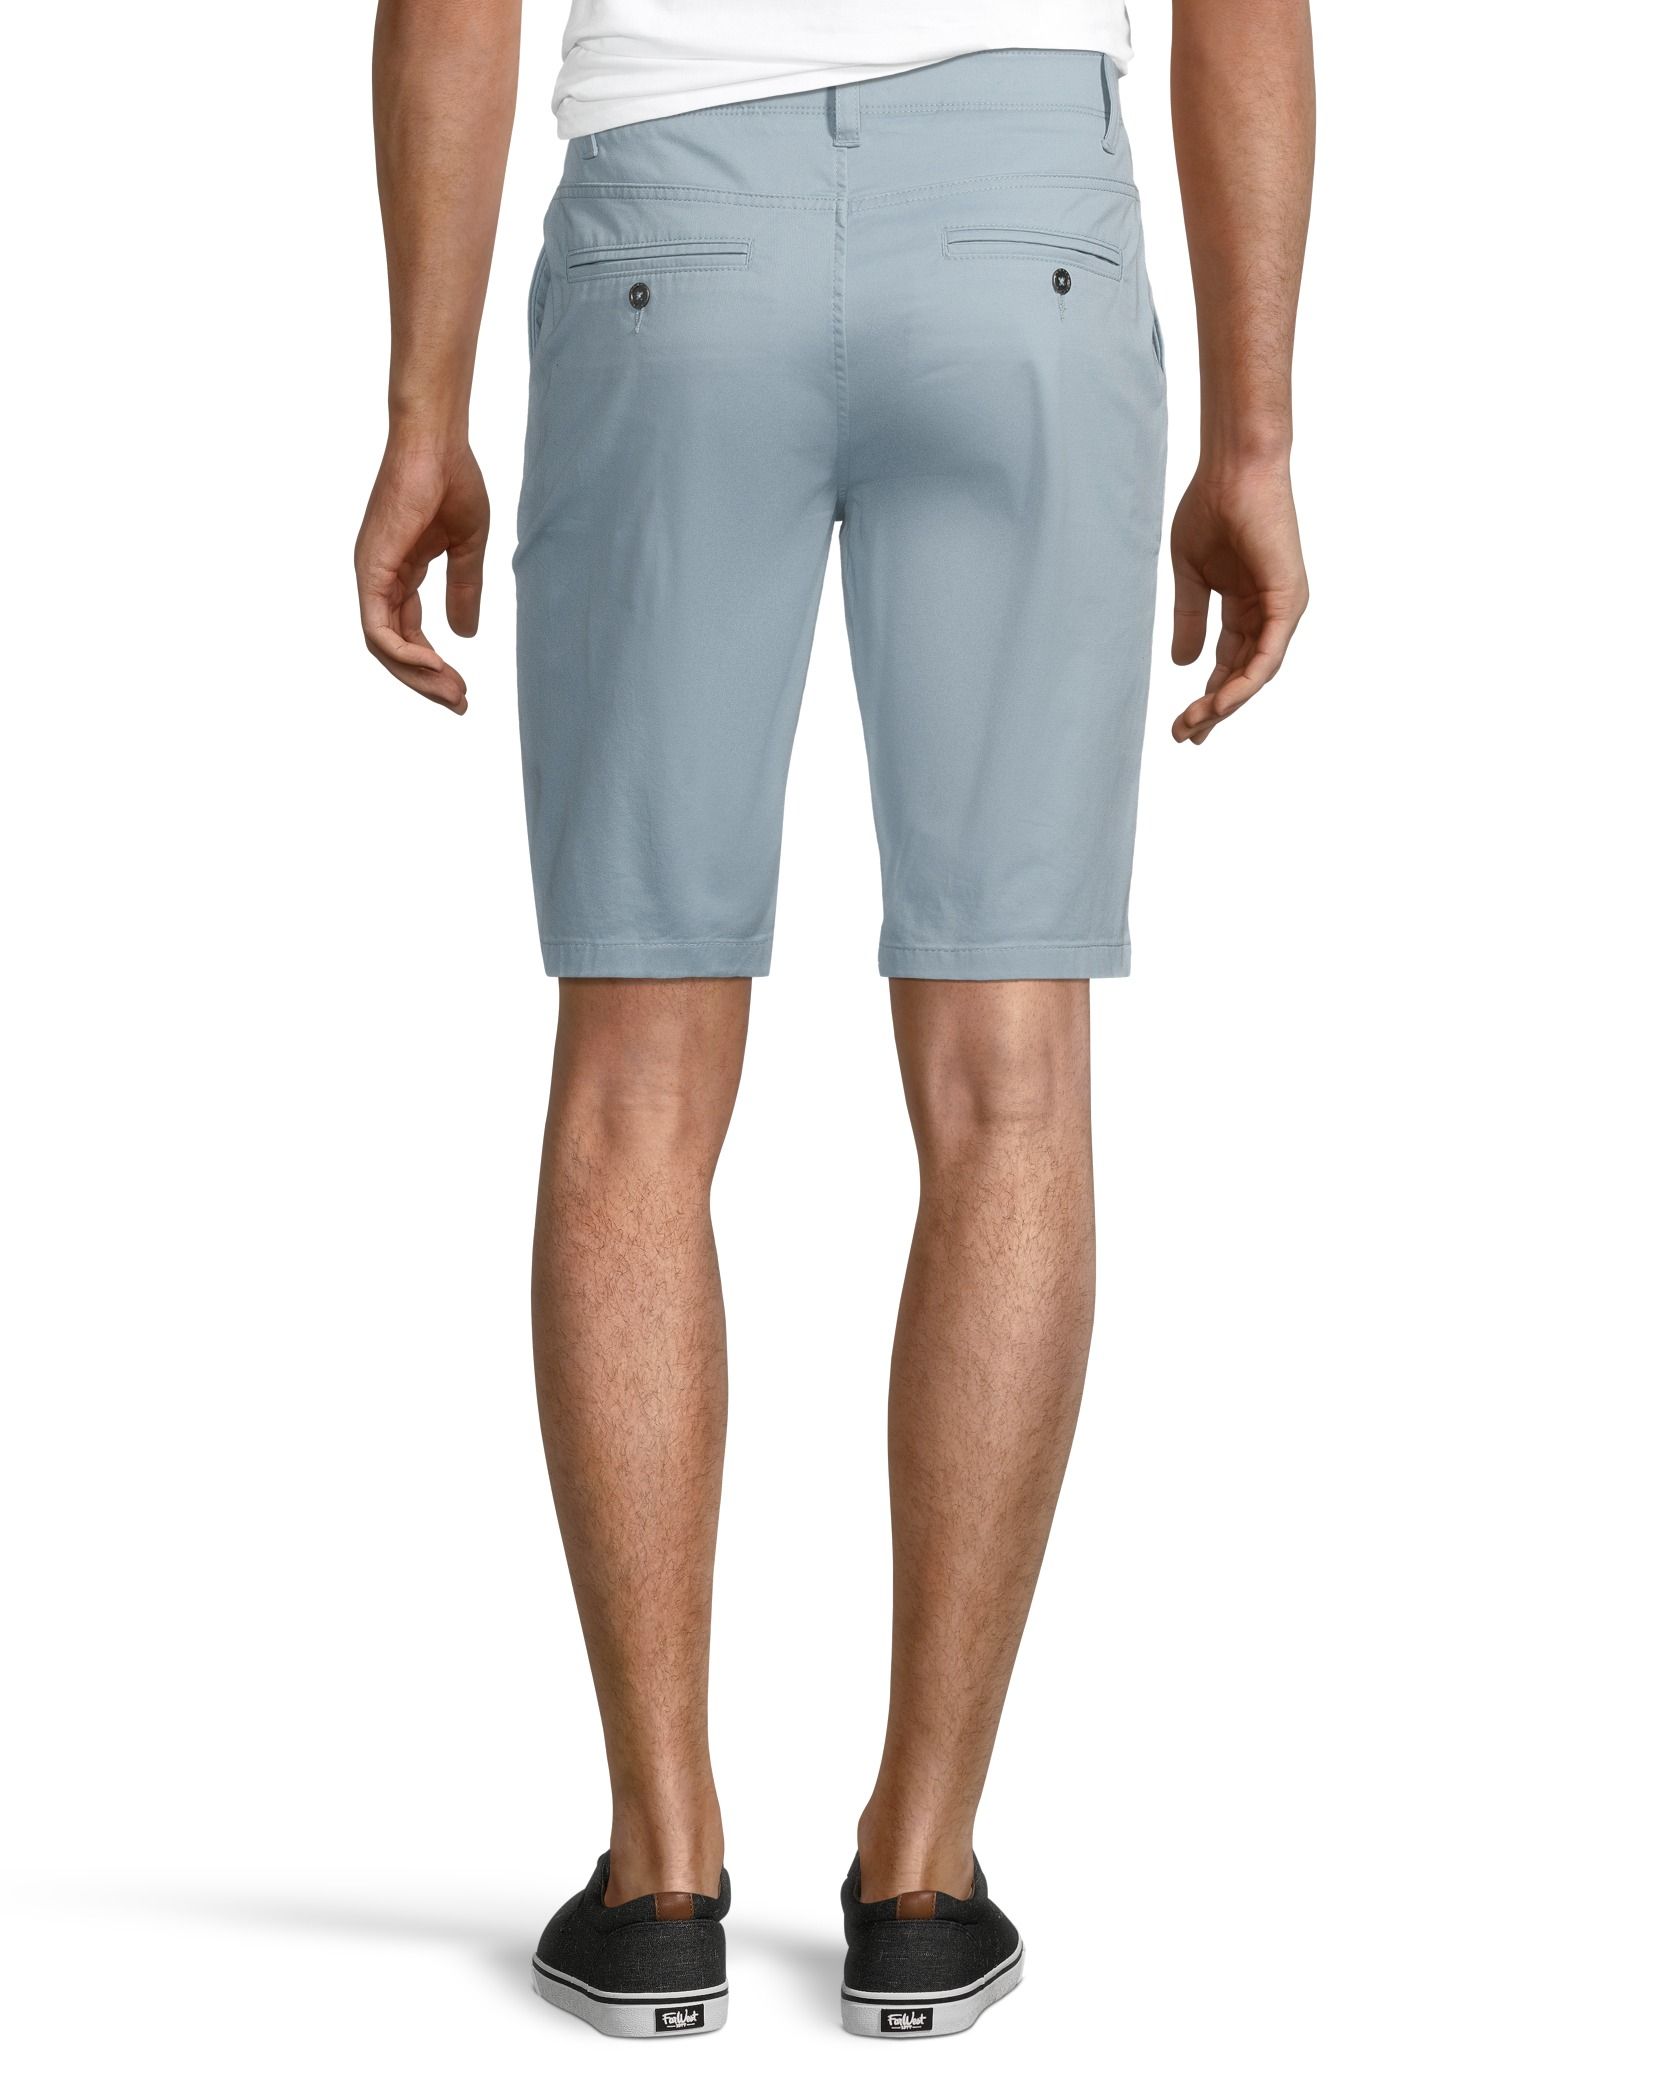 https://media-www.marks.com/product/marks-work-wearhouse/mens-world/mens-shorts/410034933586/men-s-stretch-10-inch-shorts-343fb70c-f494-42de-9a4a-1ed1e57fedca-jpgrendition.jpg?imdensity=1&imwidth=1244&impolicy=mZoom